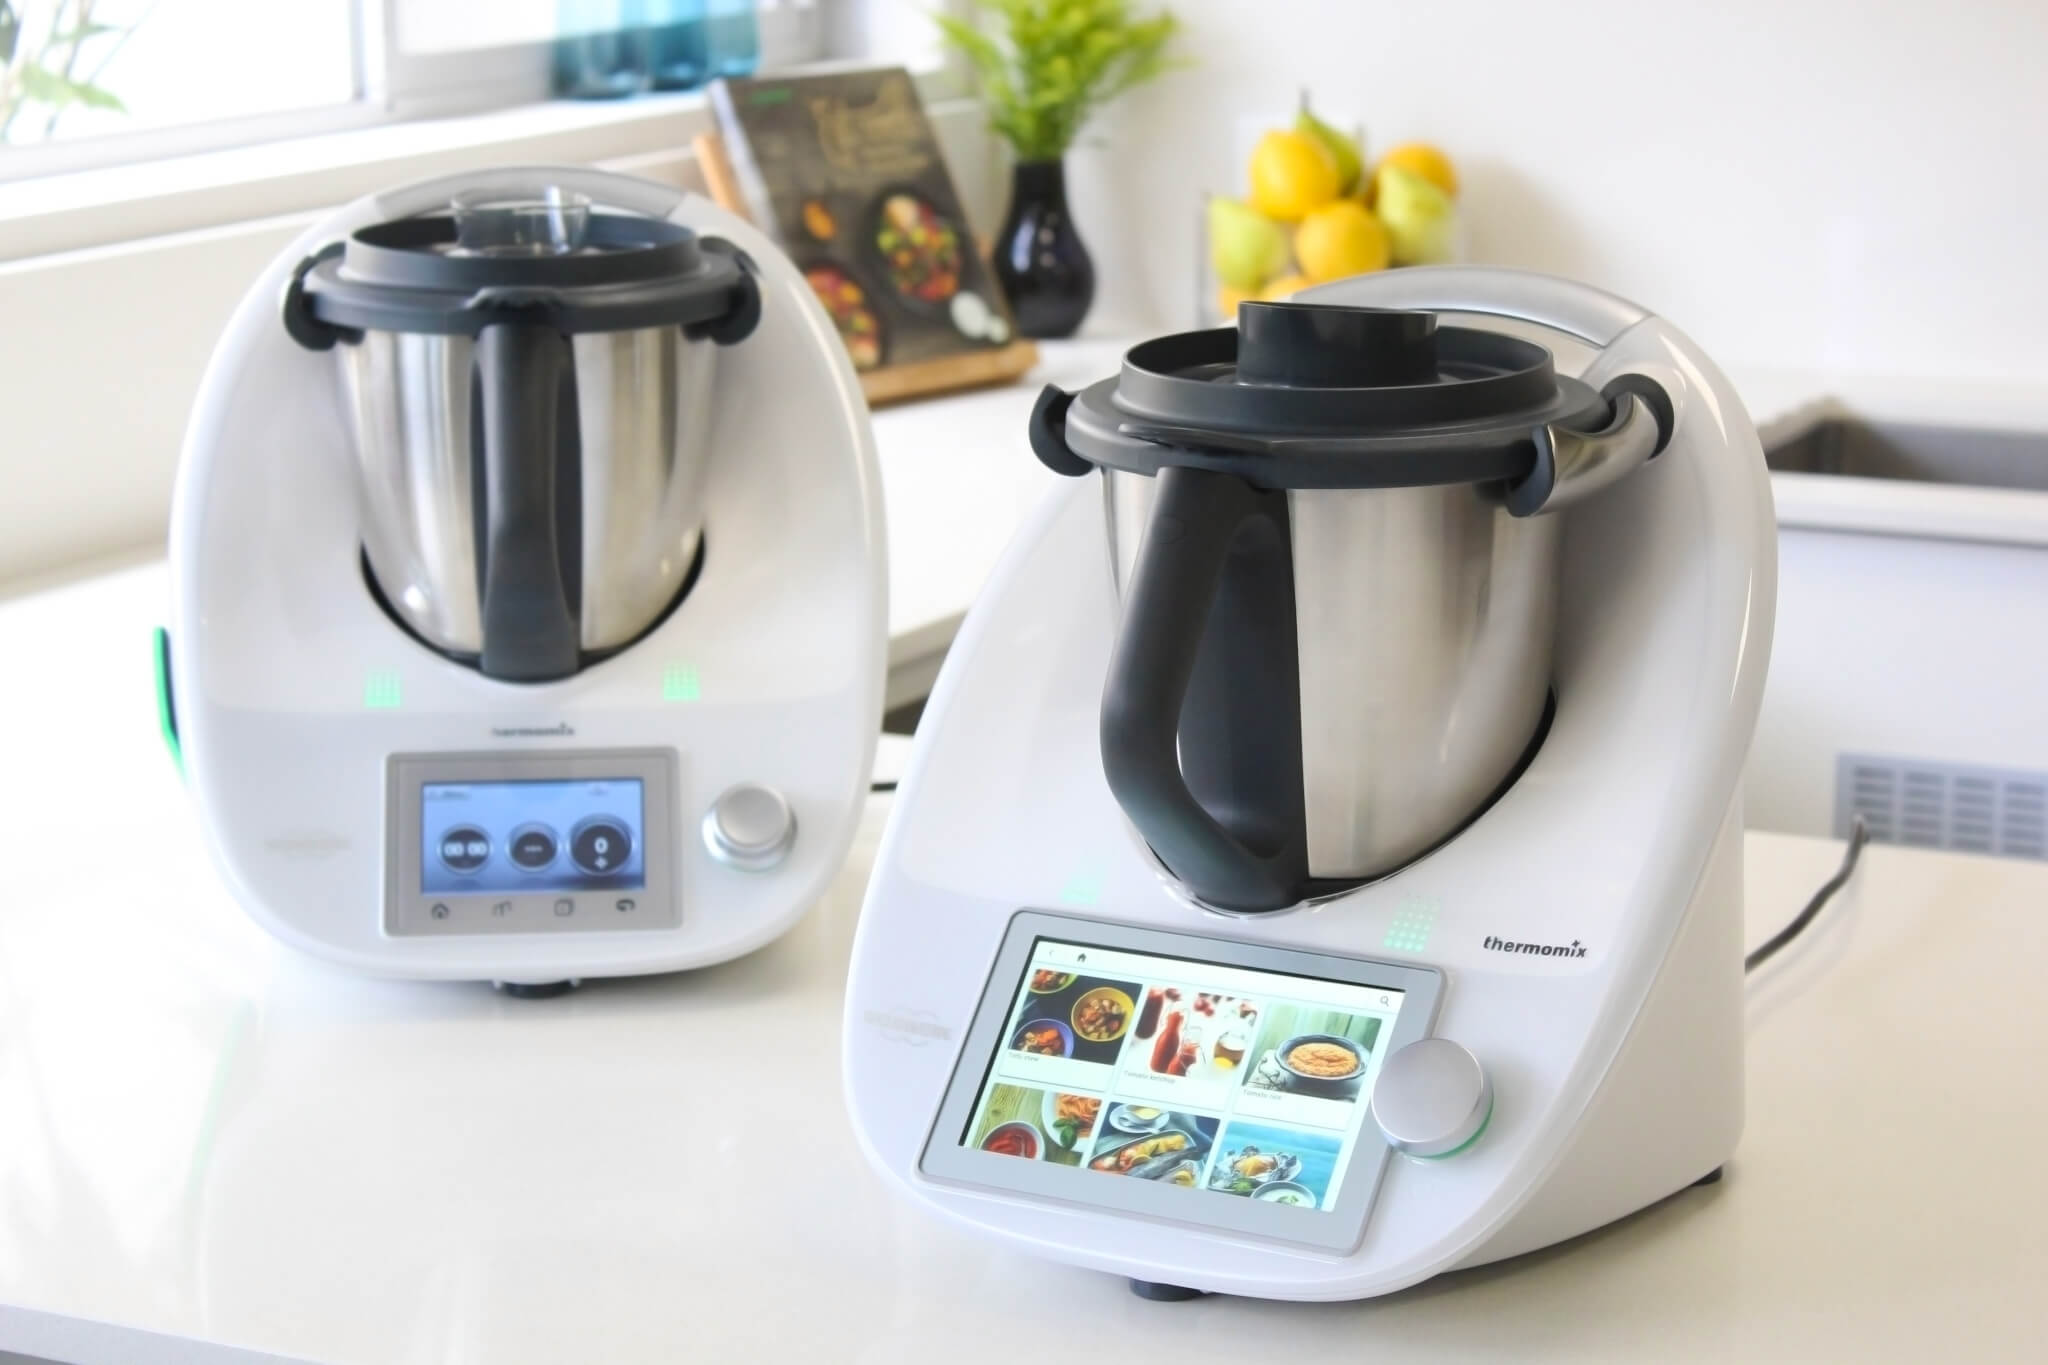 New Thermomix® Model - Learn More About Thermomix® TM6!